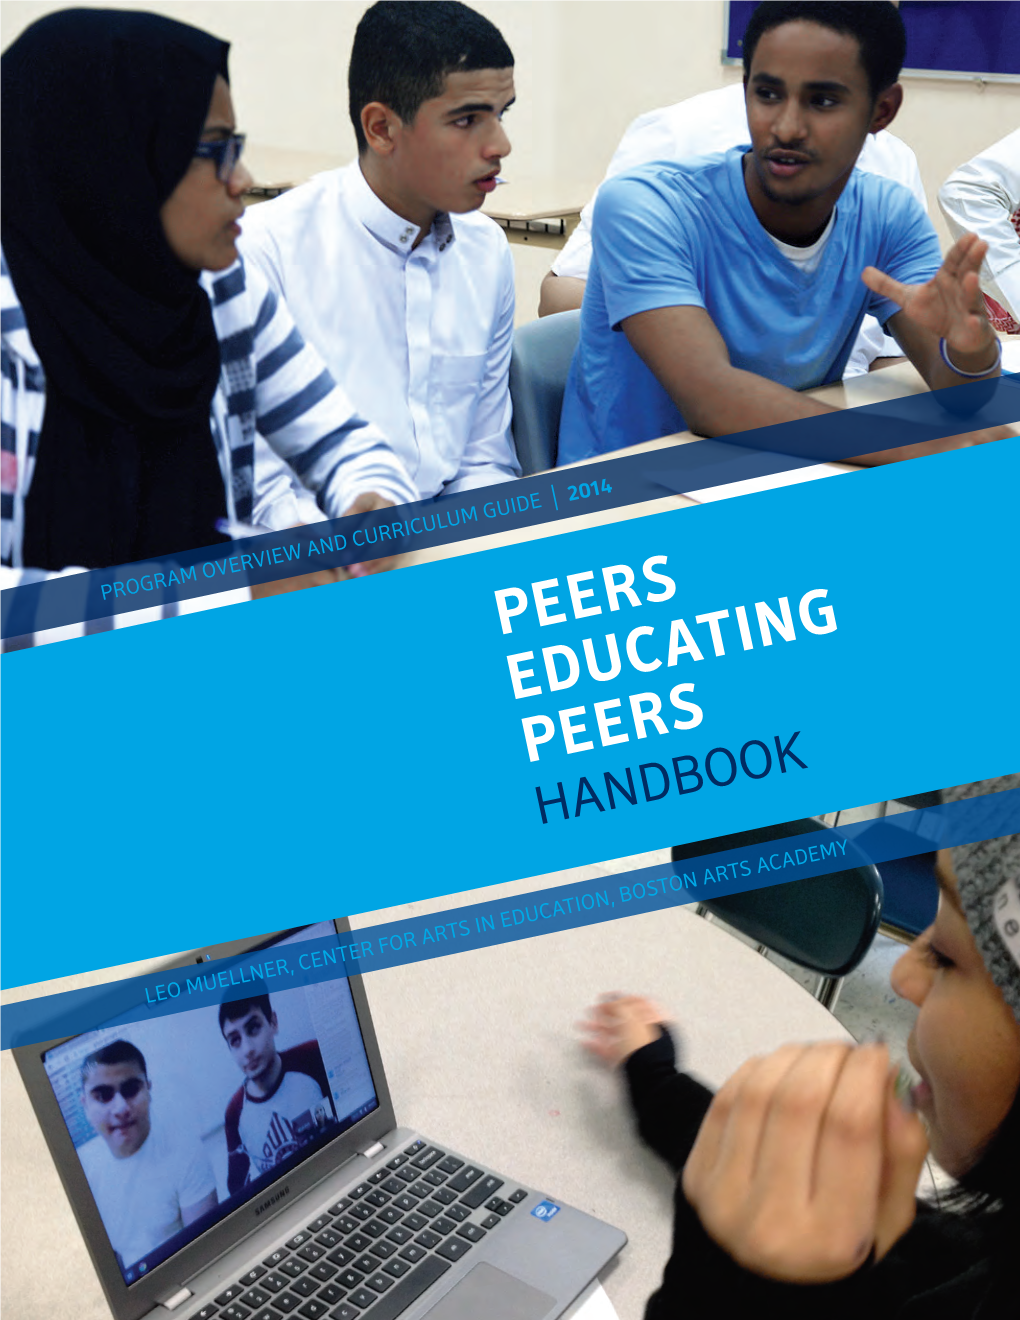 Peer Education Into a Pre-Existing Curriculum